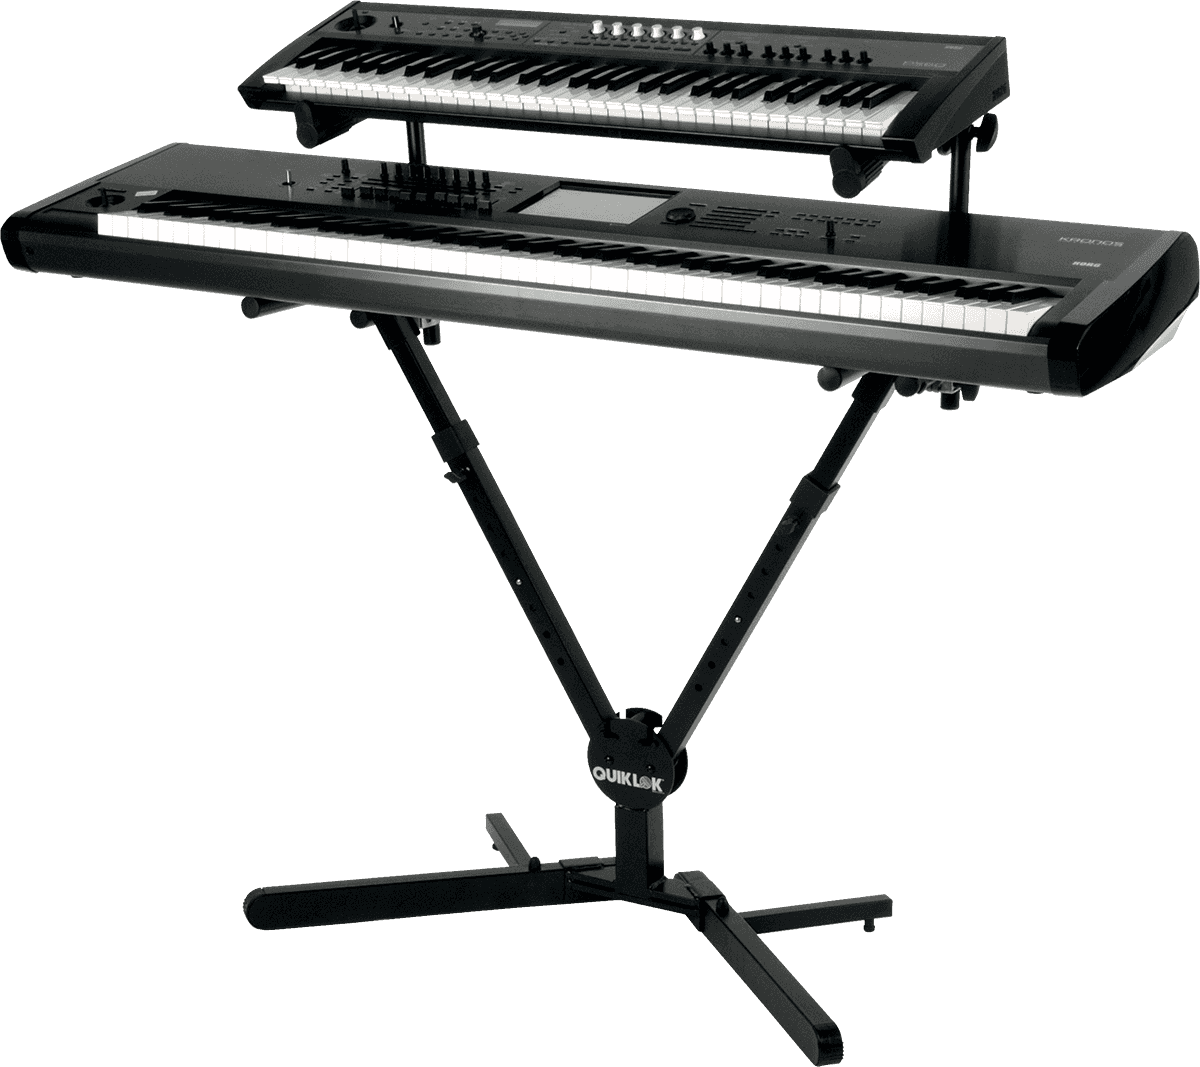 Quiklok Extension Paire Bras Clavier Pour Stand Qly40 - Keyboardstandaard - Variation 1